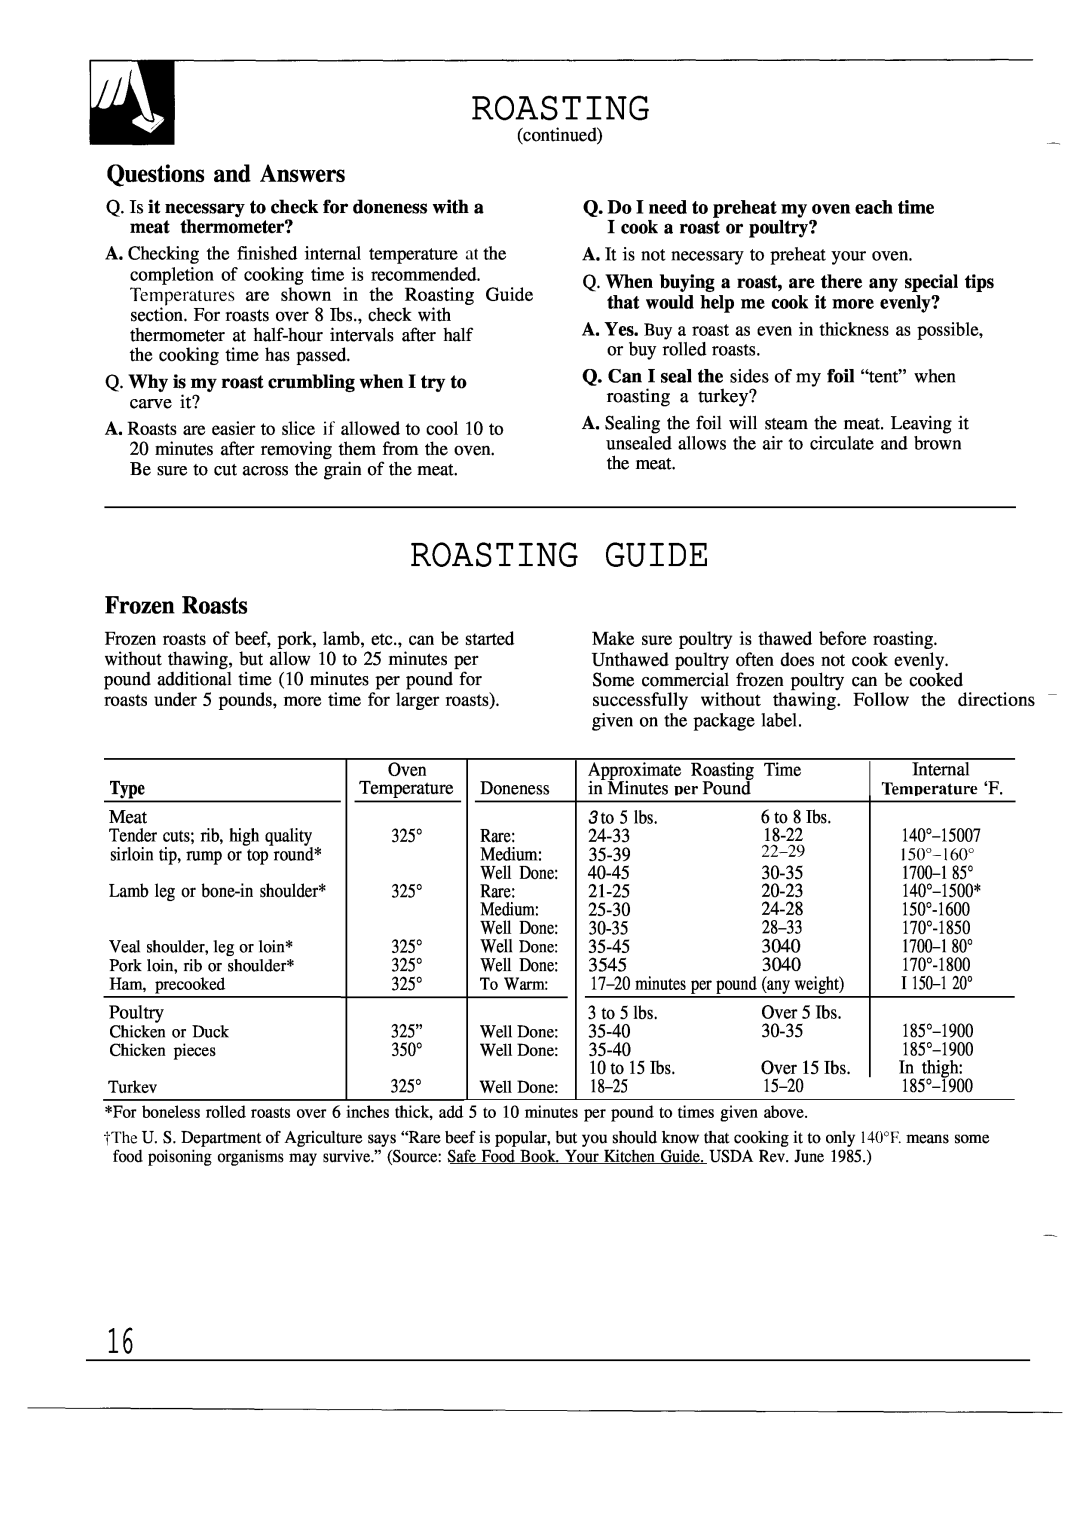 GE JGSC12, 164D2966P053 operating instructions Roasting Guide, Questions and Answers, Frozen Roasts, Type 